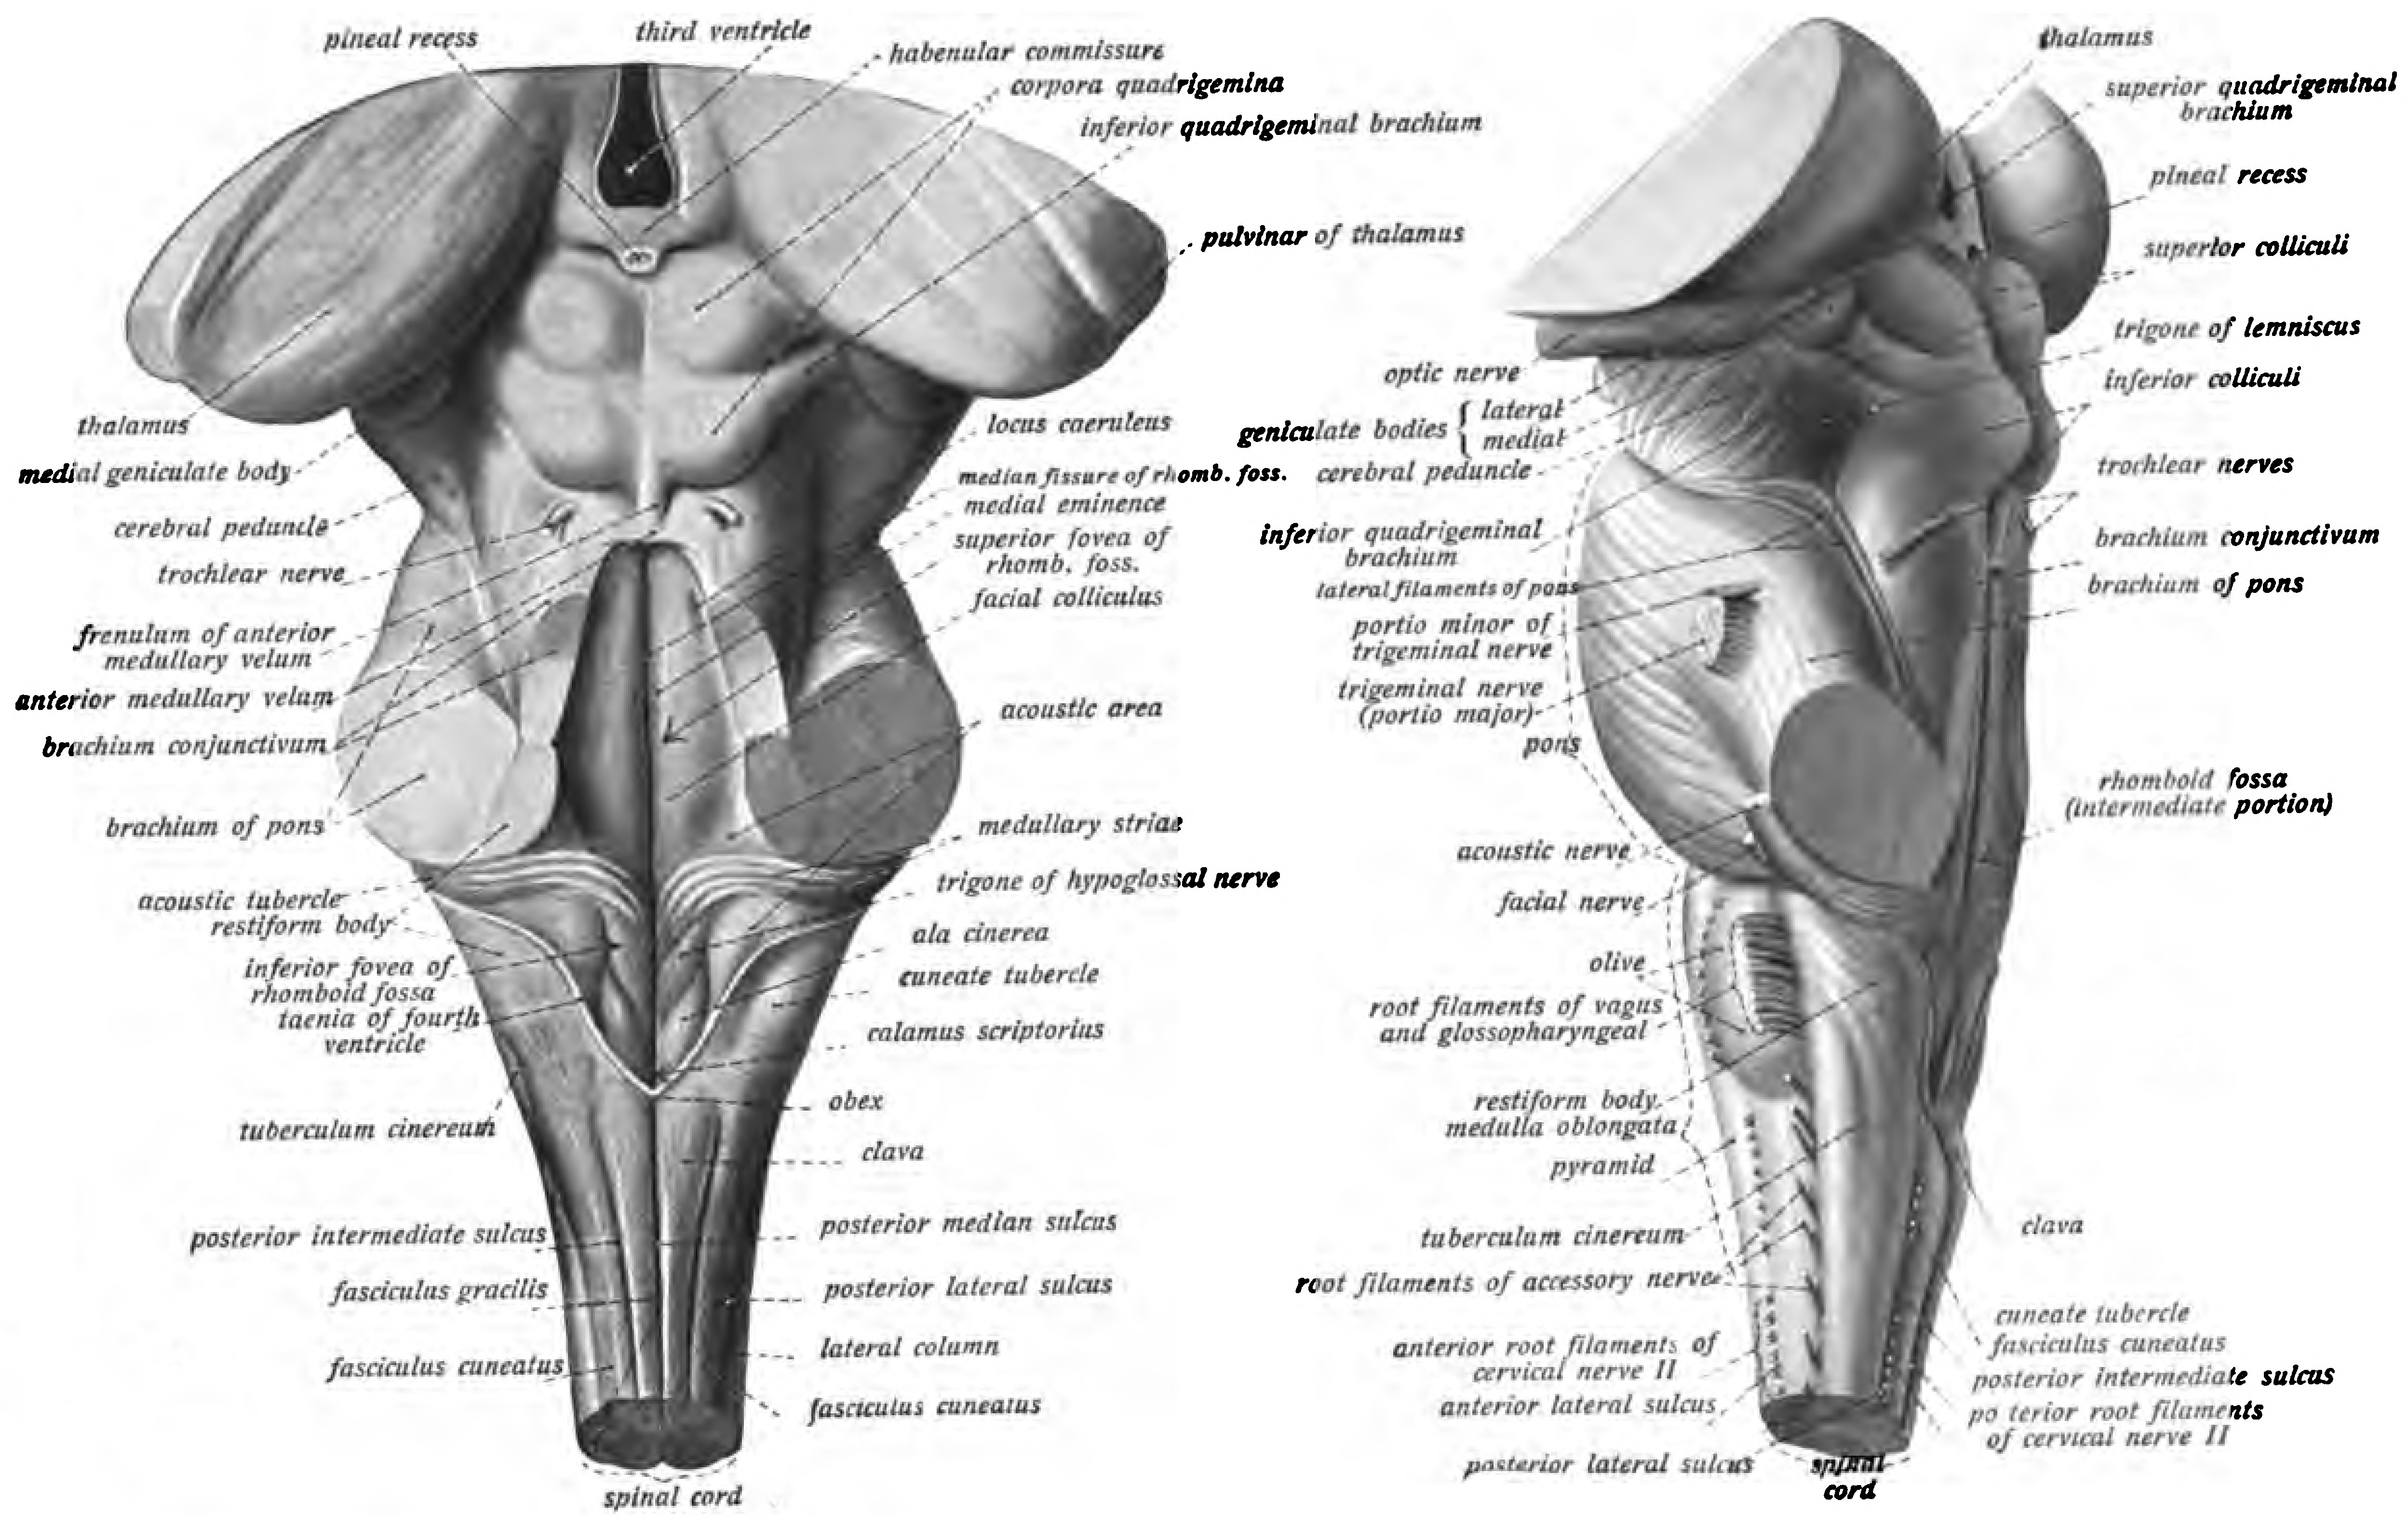 View of the brainstem from behind (left) and from the left (right). Sobotta’s Textbook and Atlas of Human Anatomy 1909